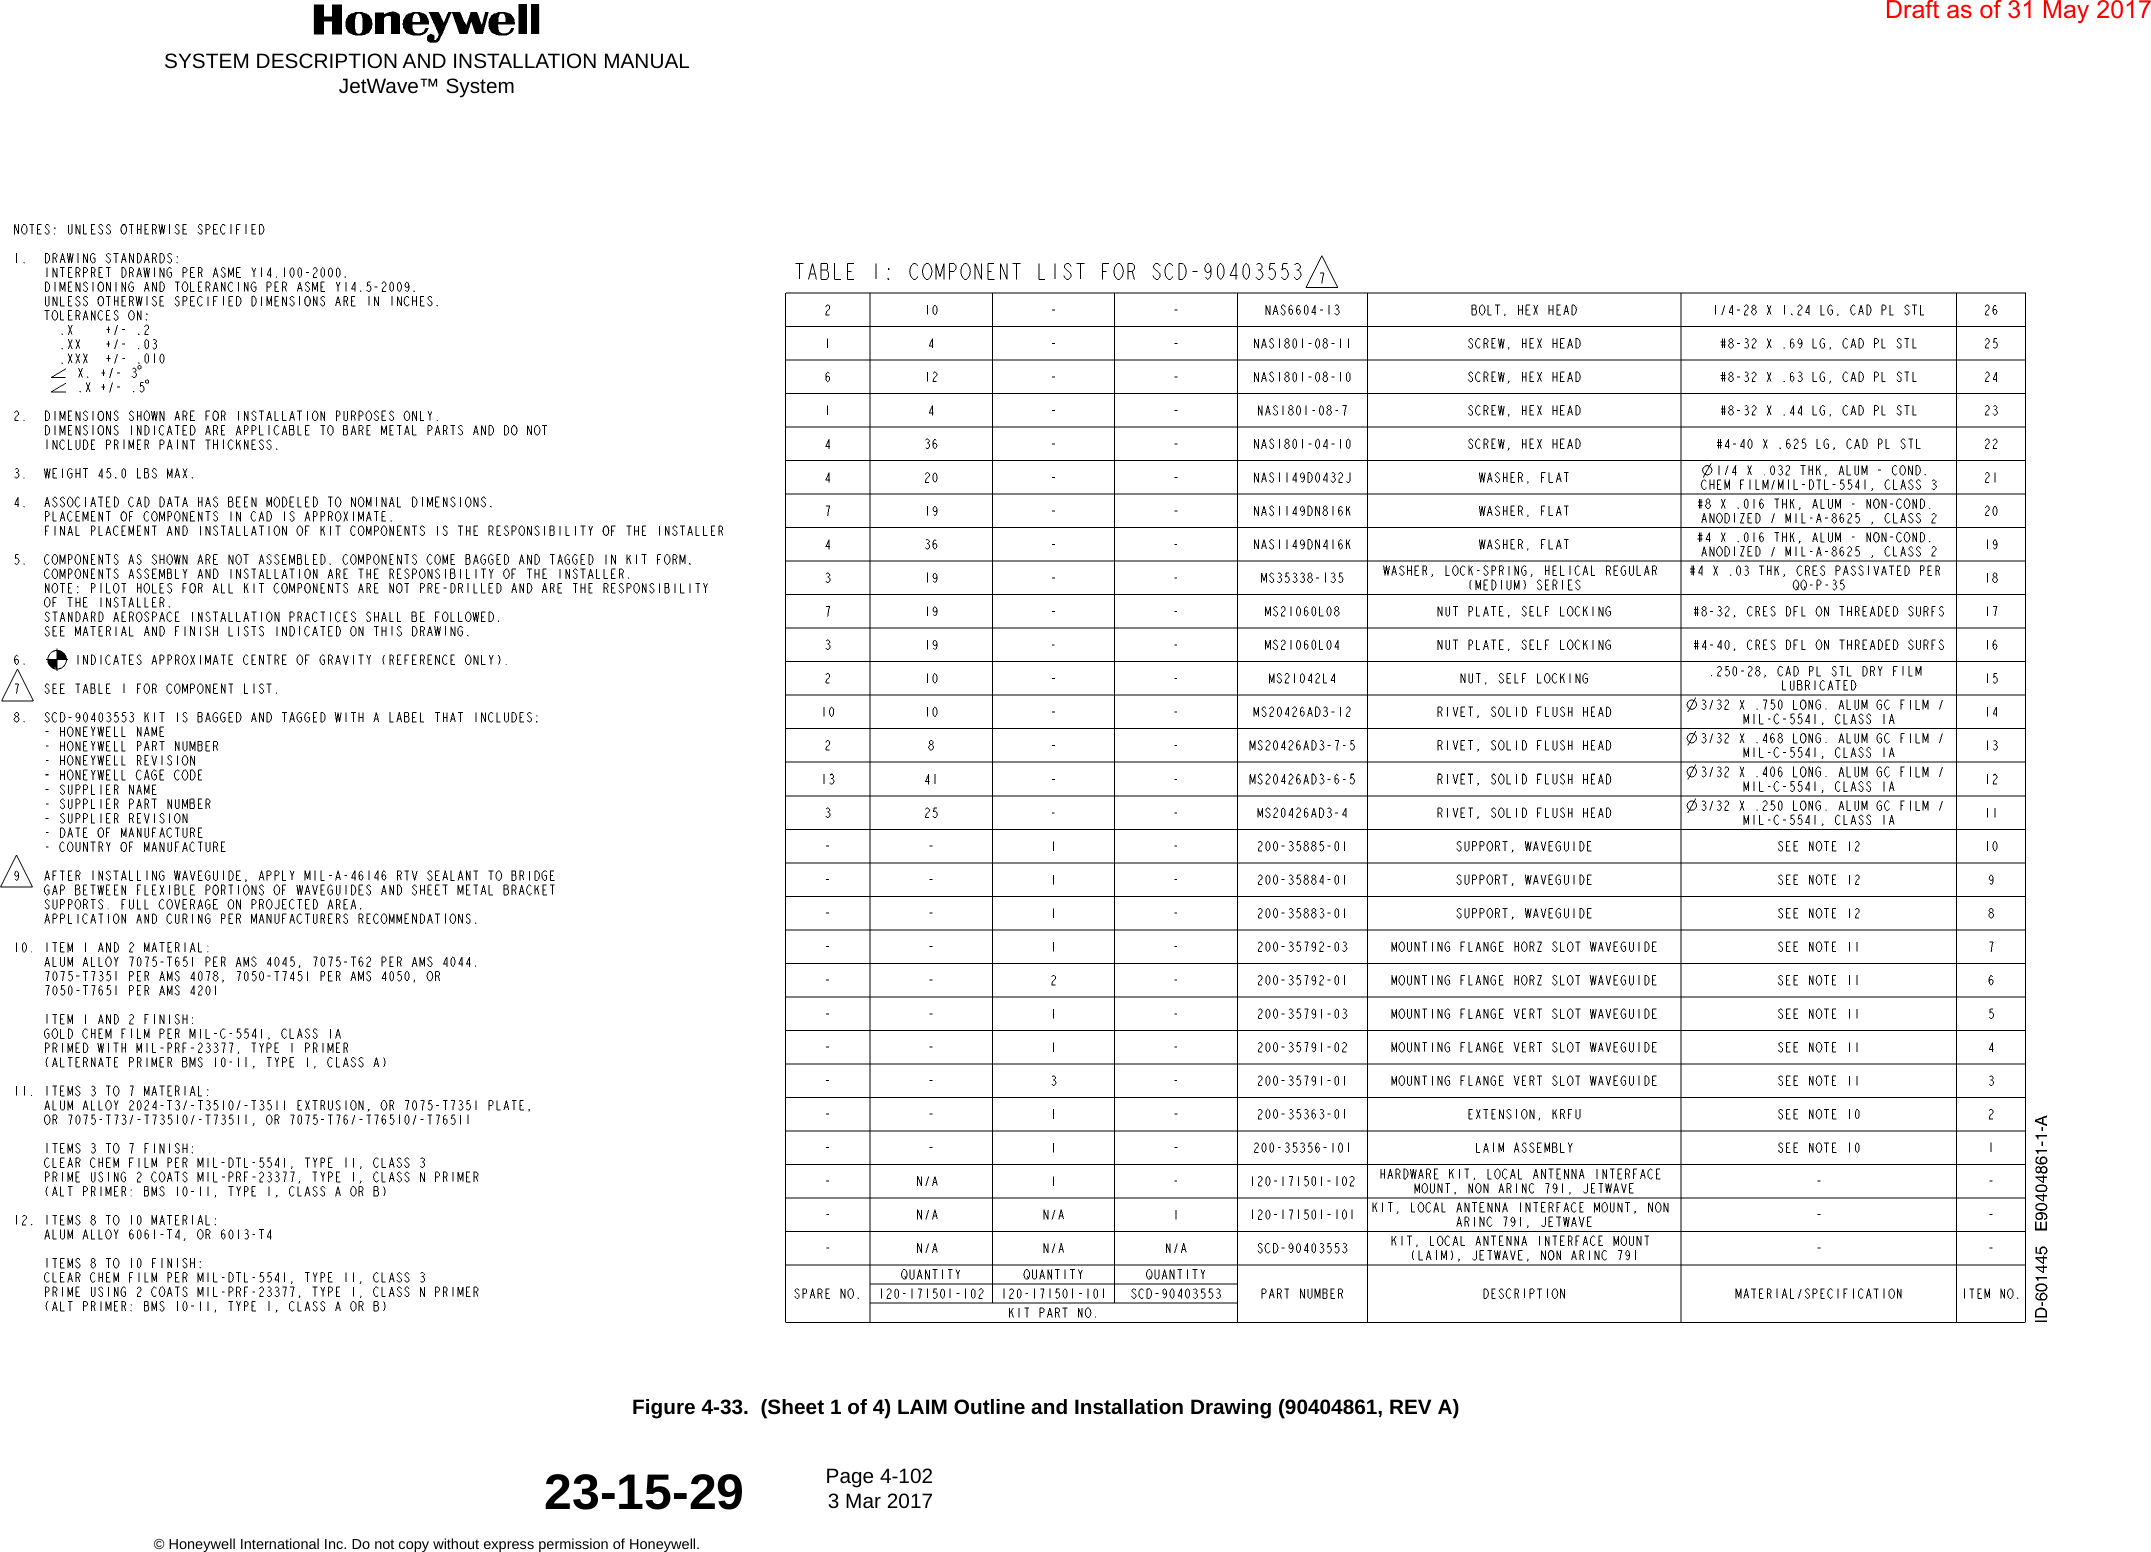 SYSTEM DESCRIPTION AND INSTALLATION MANUALJetWave™ SystemPage 4-102 3 Mar 2017© Honeywell International Inc. Do not copy without express permission of Honeywell.23-15-29Figure 4-33.  (Sheet 1 of 4) LAIM Outline and Installation Drawing (90404861, REV A)Draft as of 31 May 2017